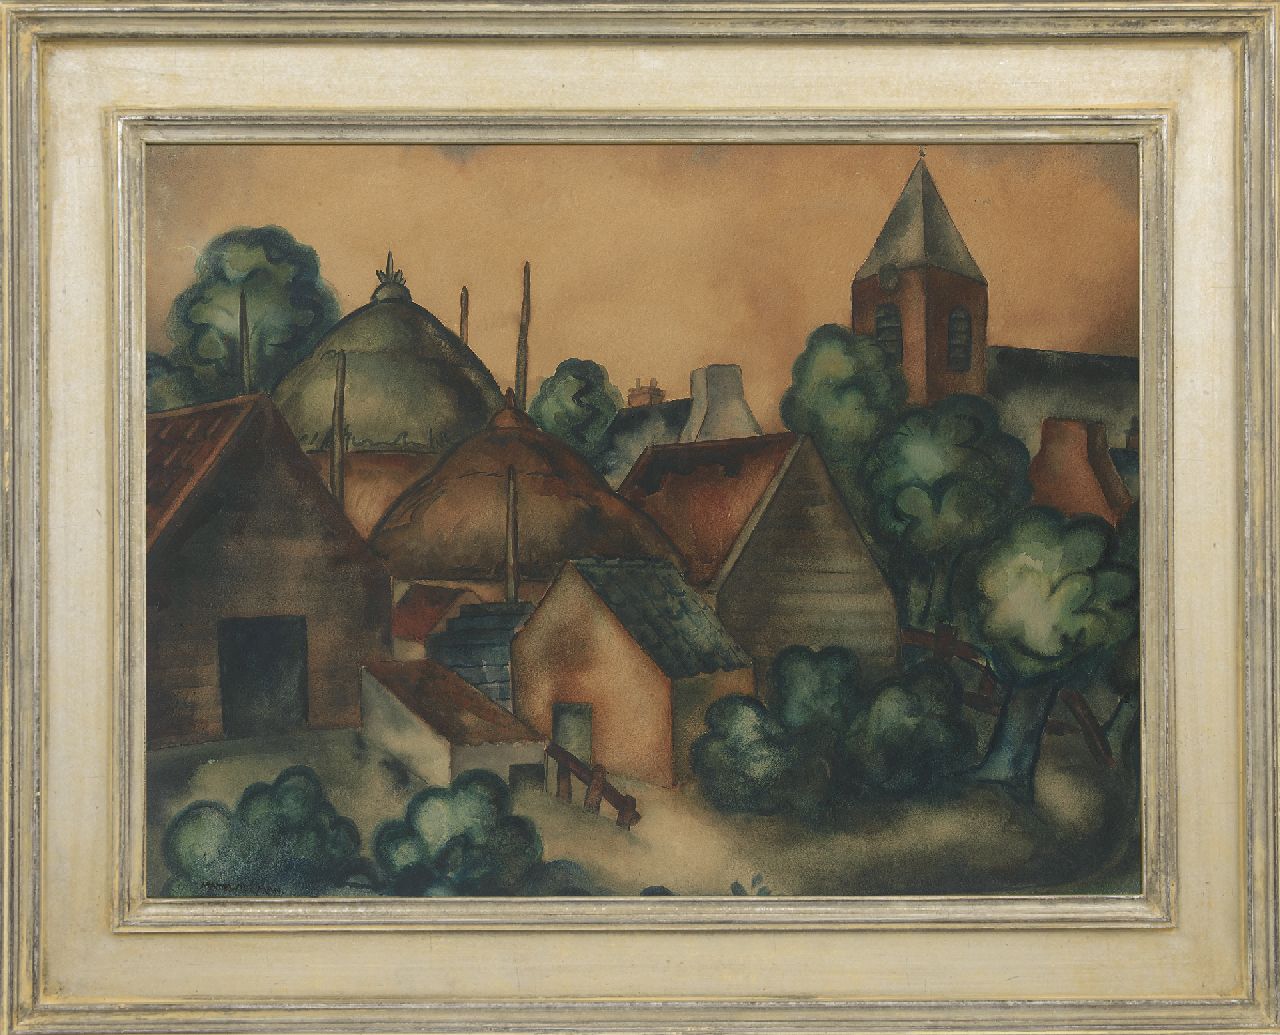 Wiegman M.J.M.  | Mattheus Johannes Marie 'Matthieu' Wiegman | Watercolours and drawings offered for sale | A village view, charcoal and watercolour on paper 68.2 x 90.0 cm, signed l.l.